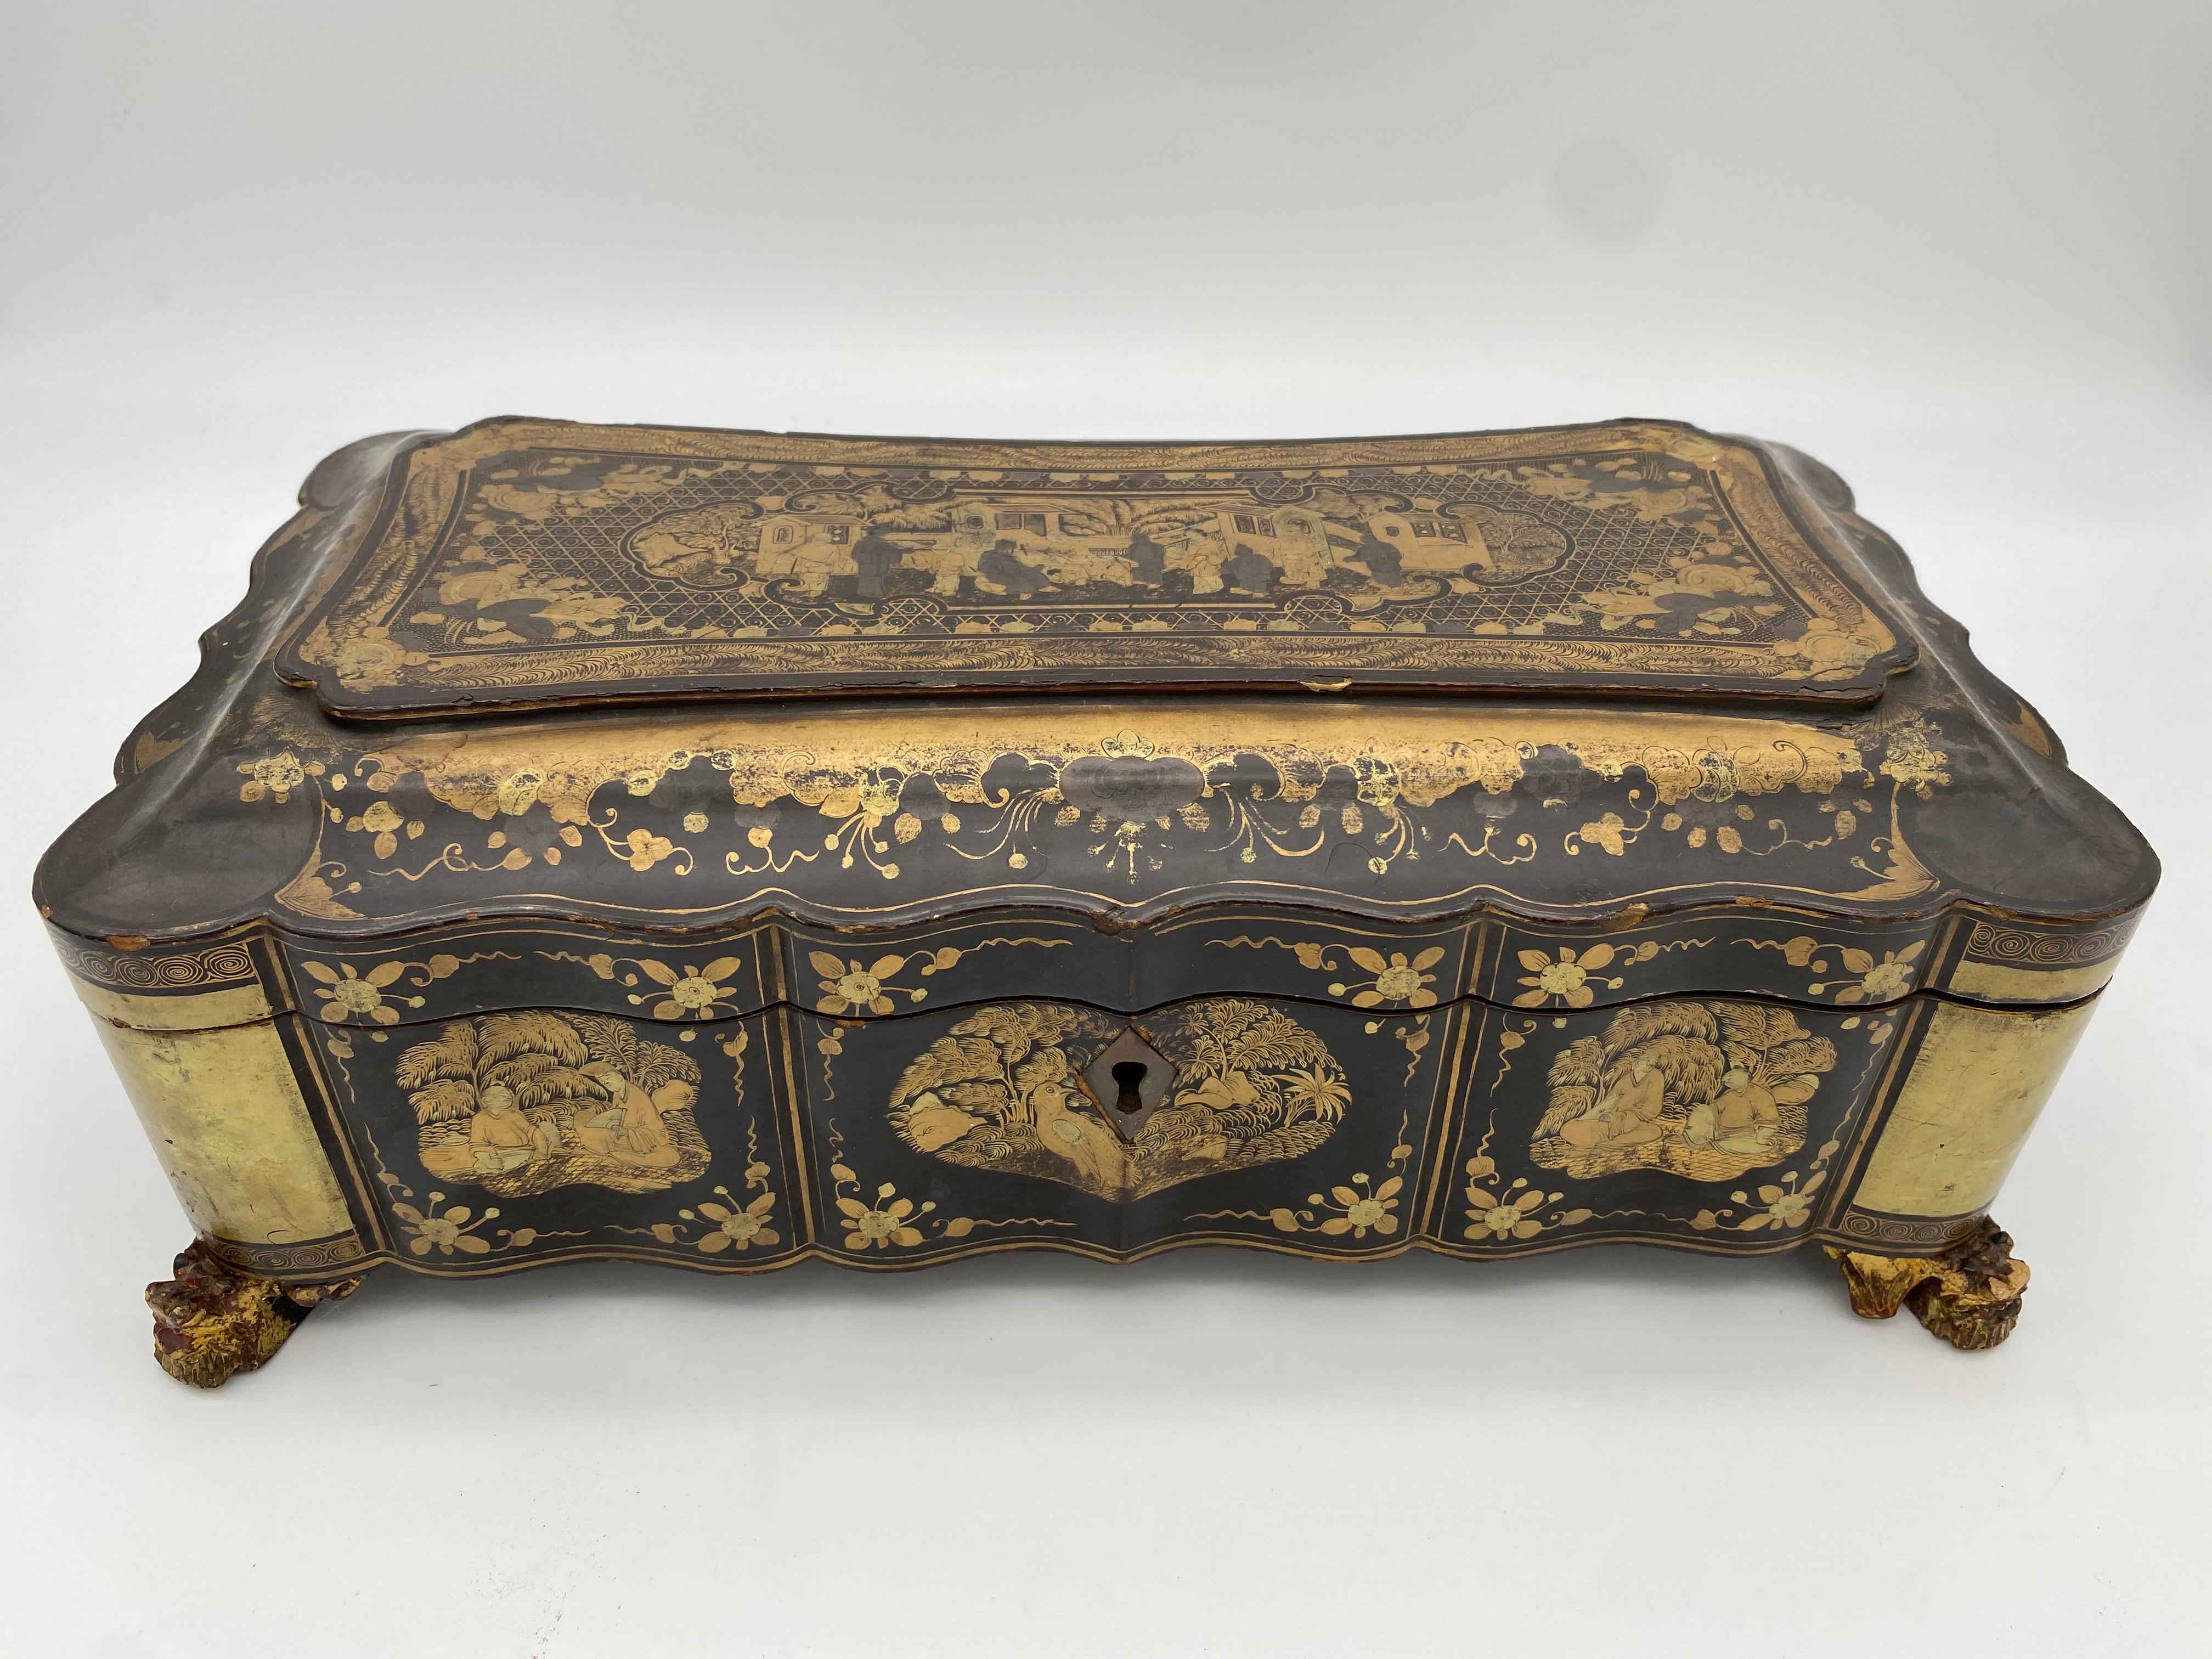 19th century Chinese lacquer gaming box from the Qing Dynasty. Black and golden drawing by hand with 3 gaming lacquer boxes, in very good condition. Measures: 12 x 6 x 4.5 inch high.